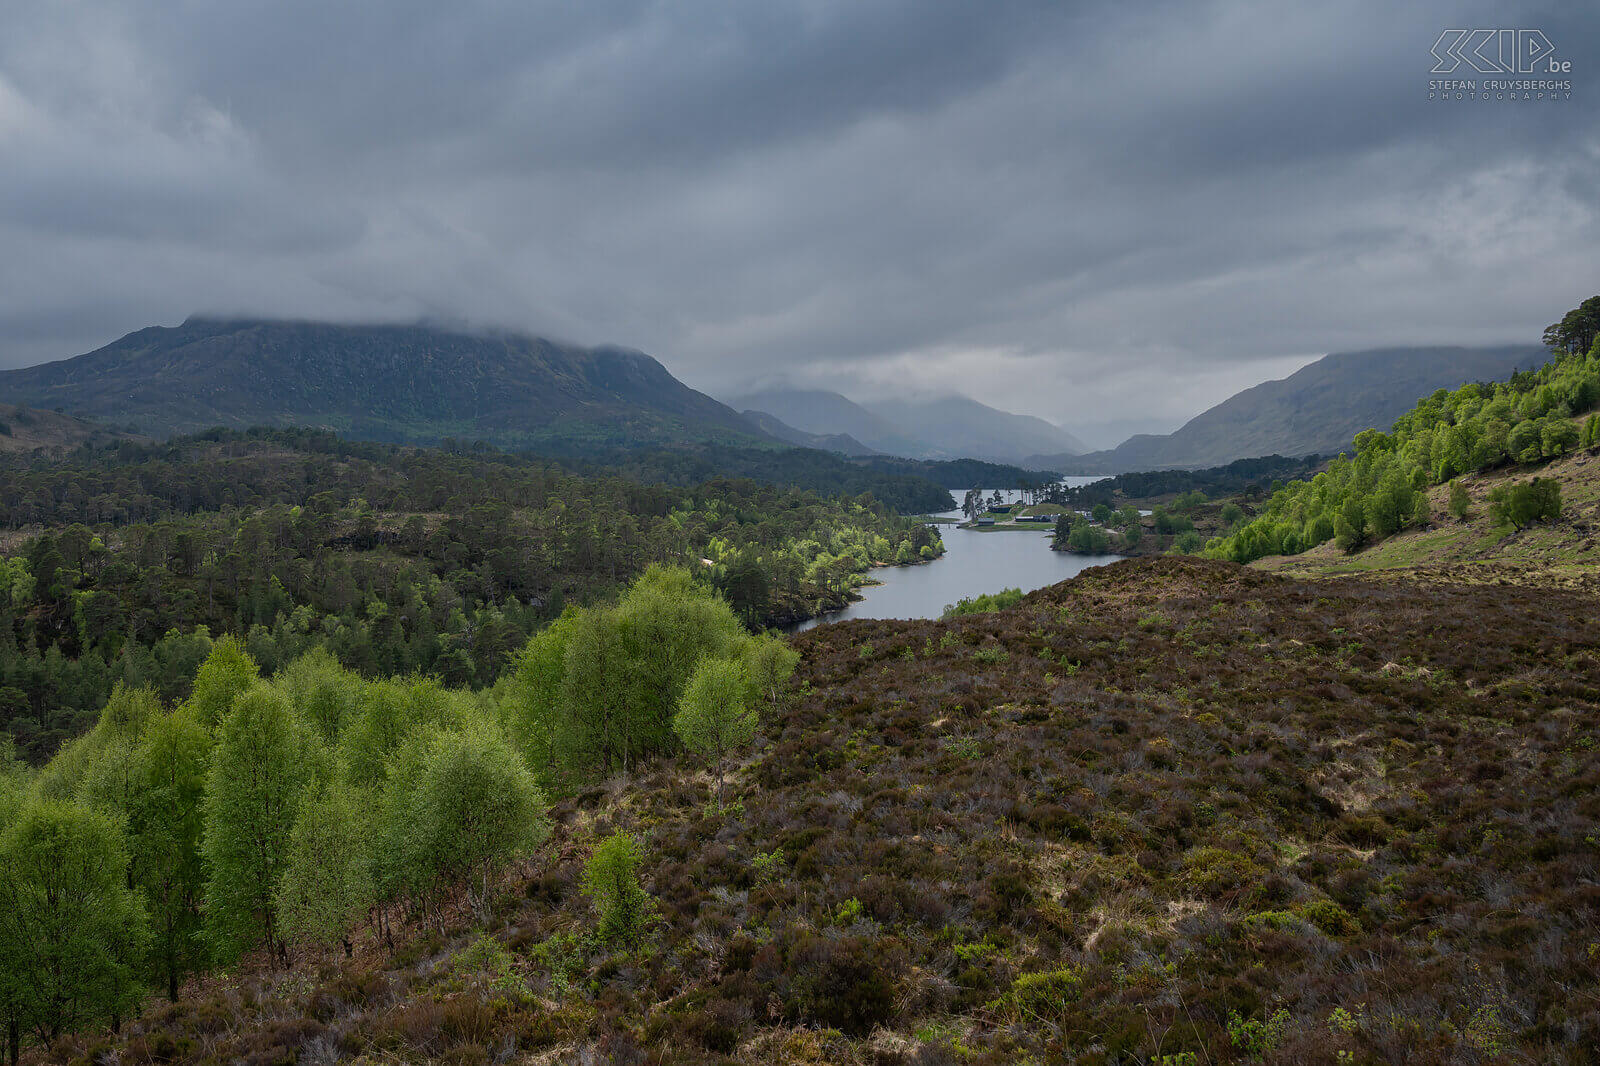 Glen Affric Glen Affric is one of the most beautiful valleys in Scotland Stefan Cruysberghs